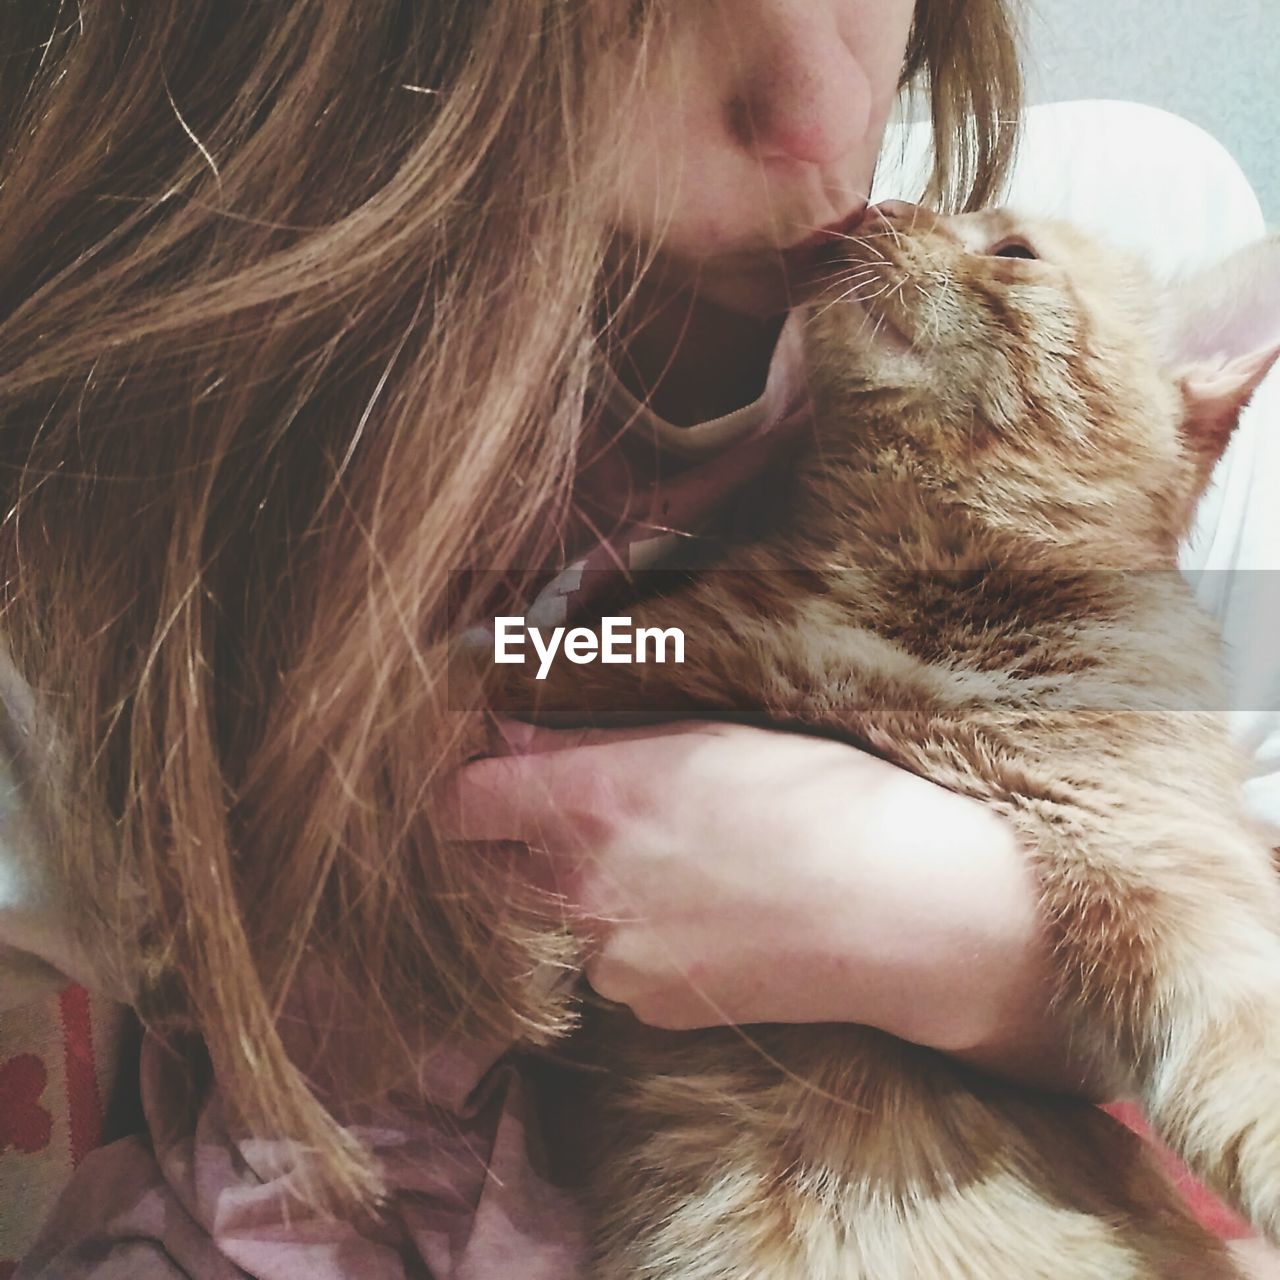 Cropped image of woman kissing cat